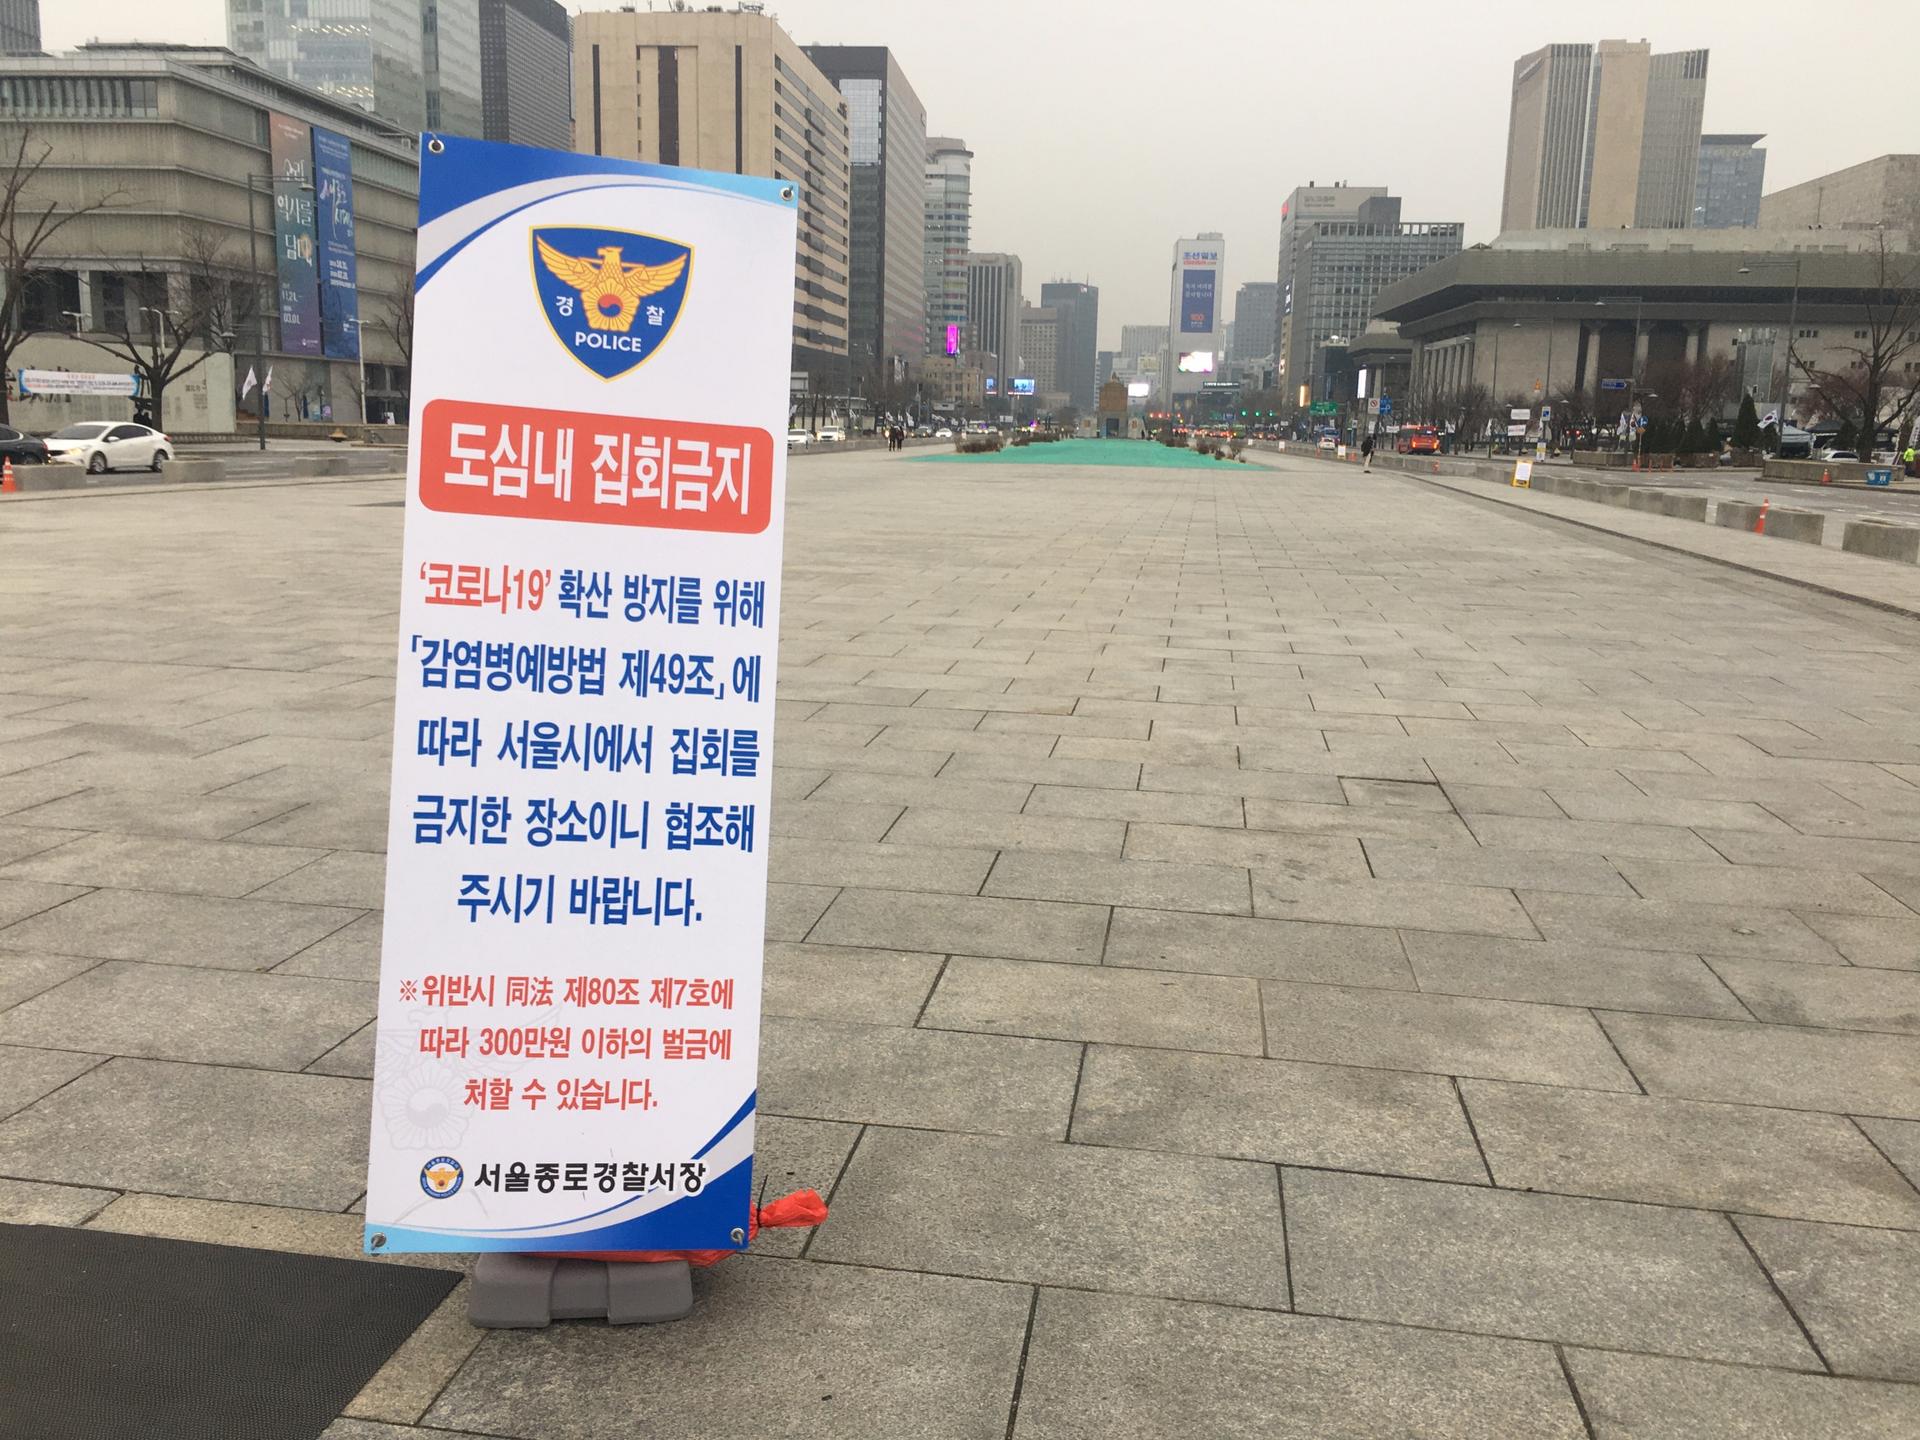 Seoul, South Korea, has banned protests during the coronavirus outbreak. A sign warns that violators will be fined nearly $3,000. 